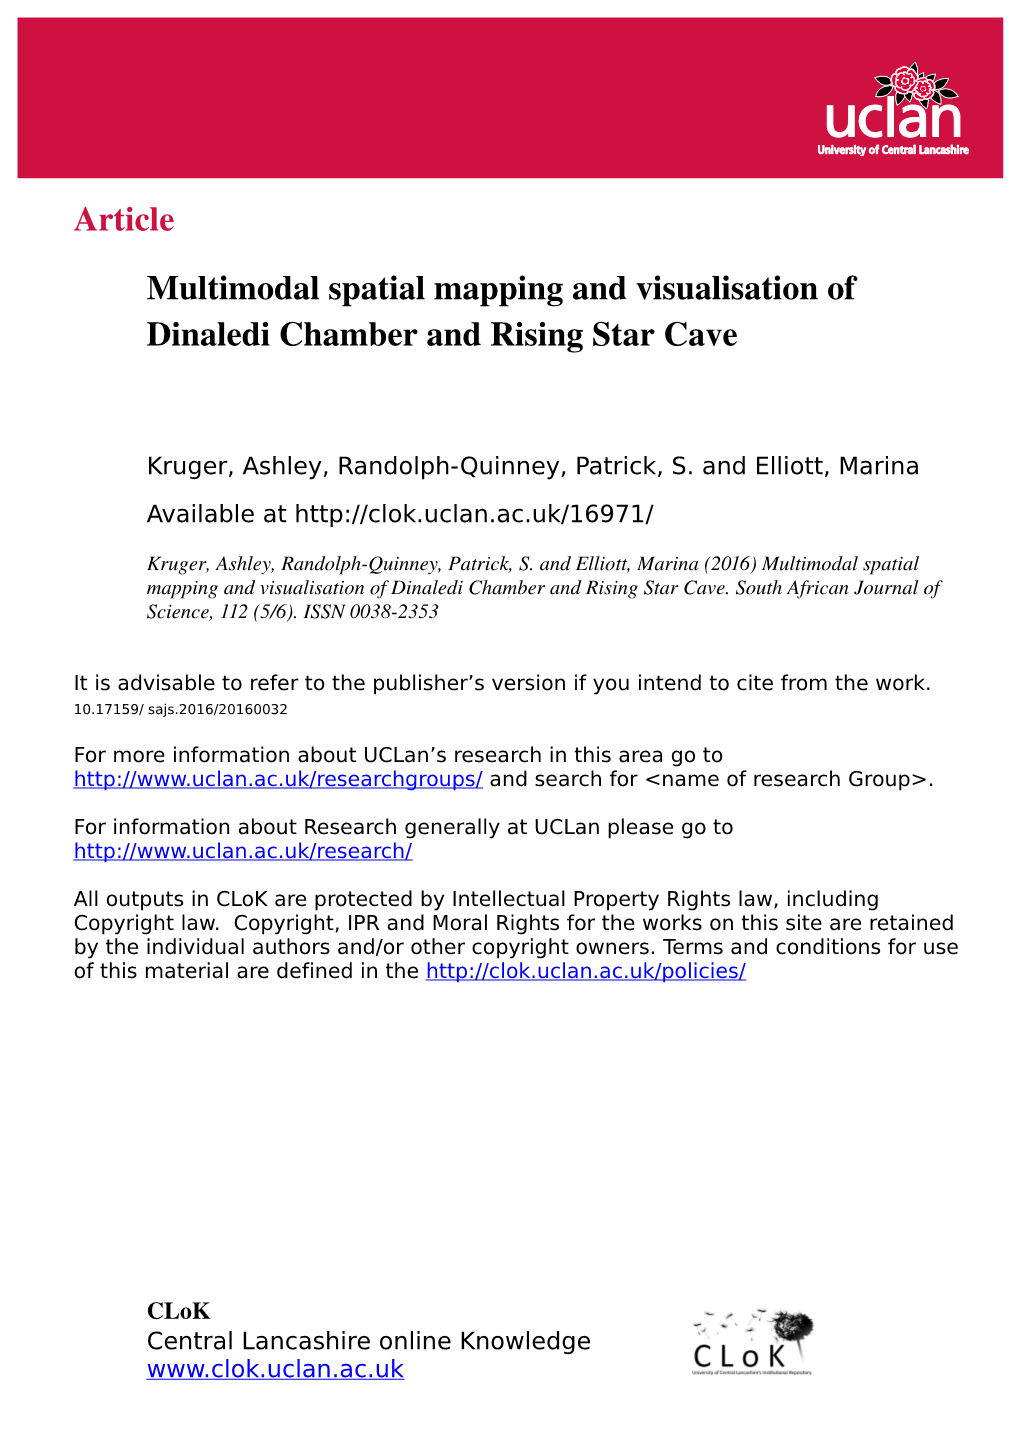 Multimodal Spatial Mapping and Visualisation of Dinaledi Chamber and Rising Star Cave